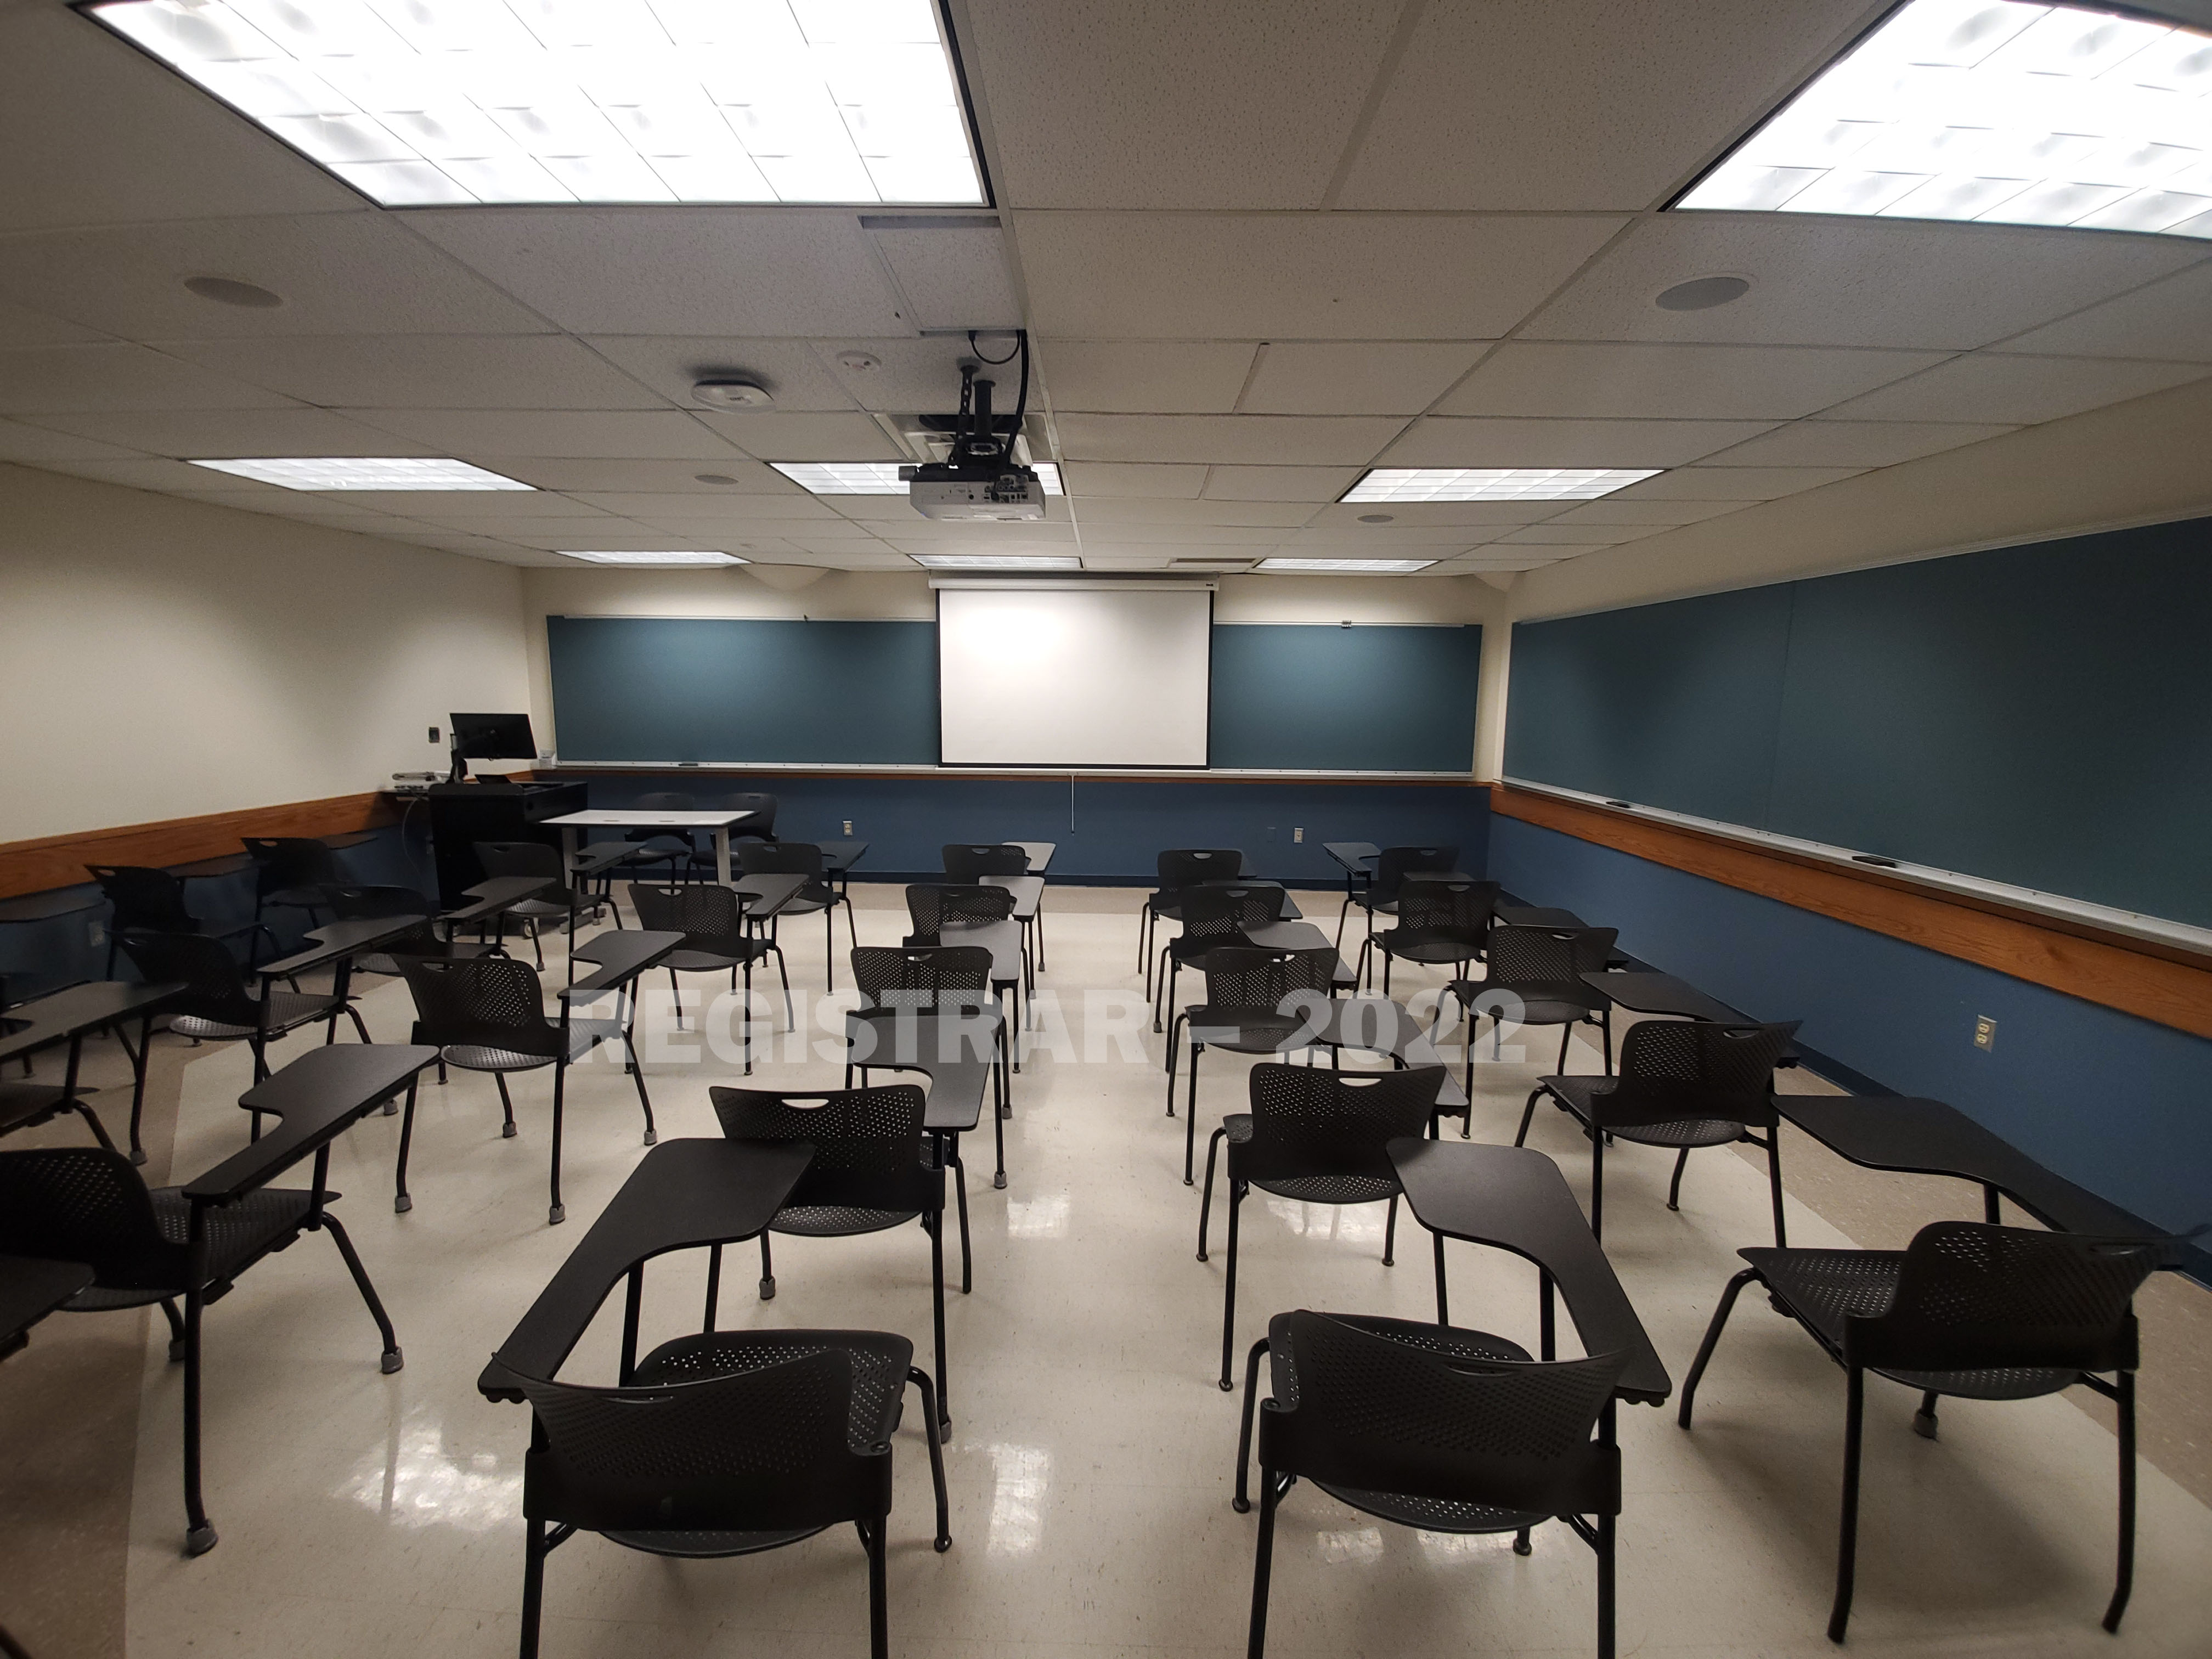 Enarson Classroom Building room 209 ultra wide angle view from the back of the room with projector screen down